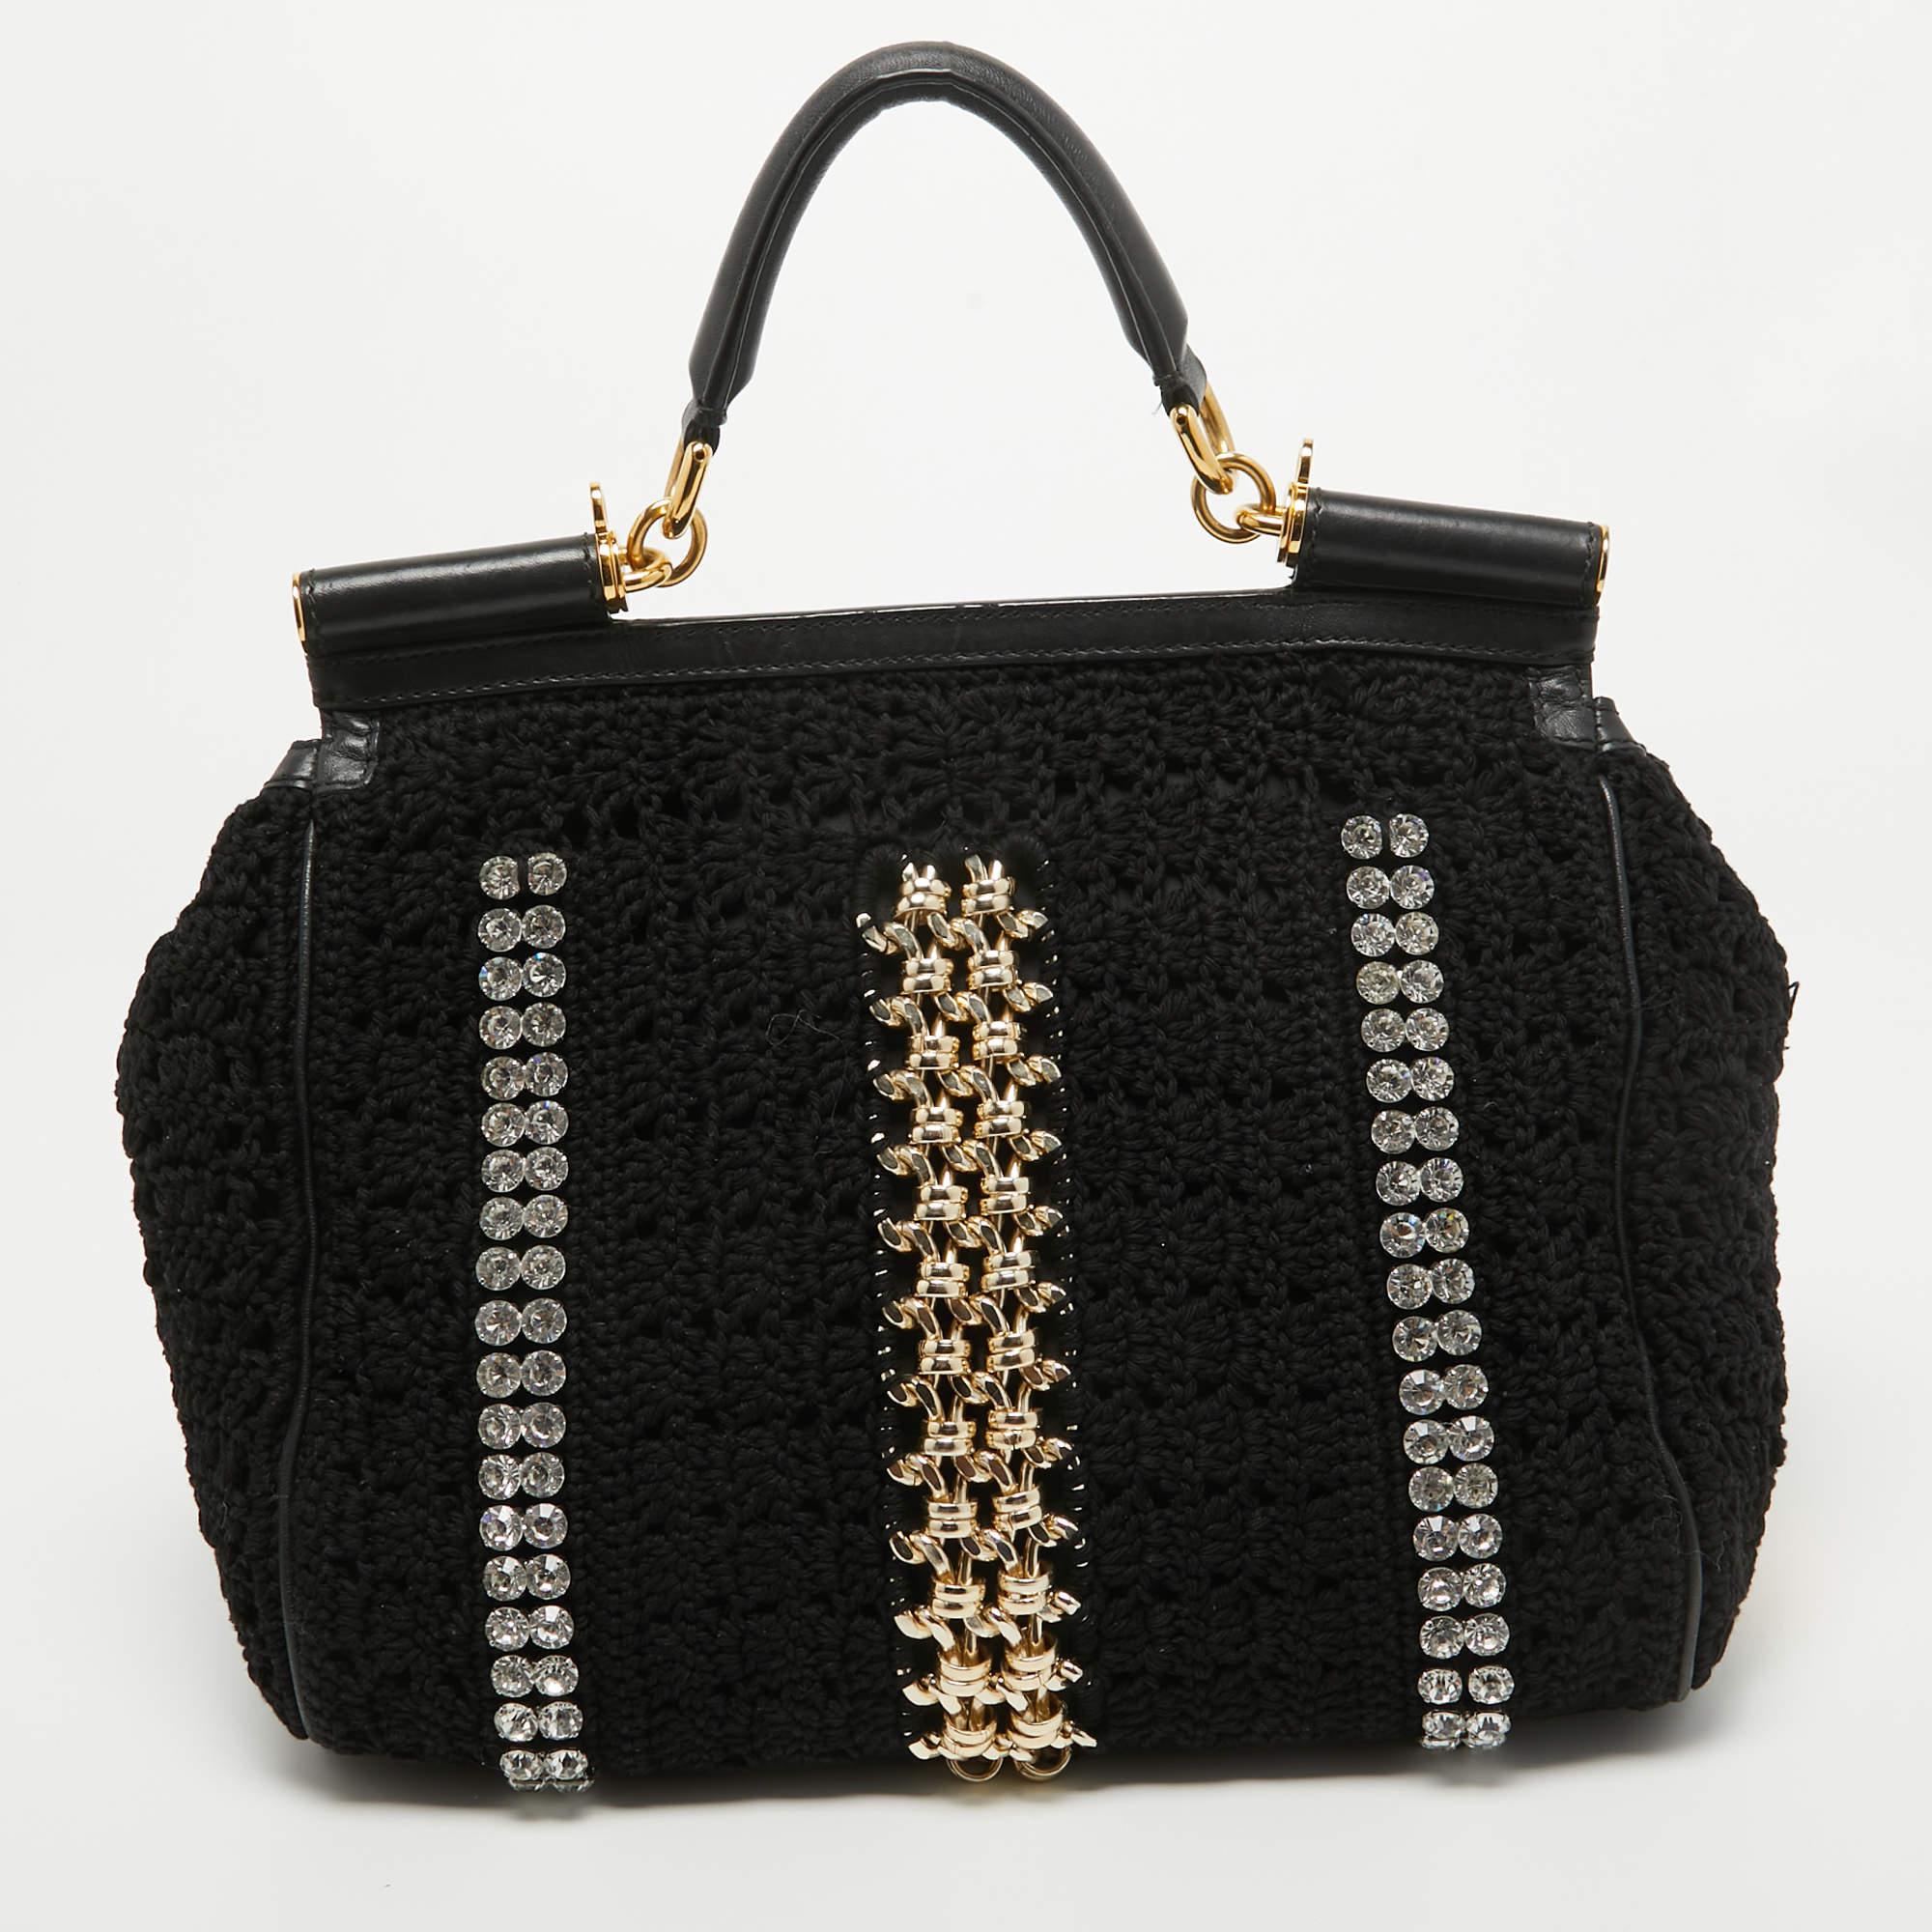 Dolce & Gabbana Crochet Fabric Crystal and Chain Miss Sicily Top Handle Bag In Good Condition For Sale In Dubai, Al Qouz 2